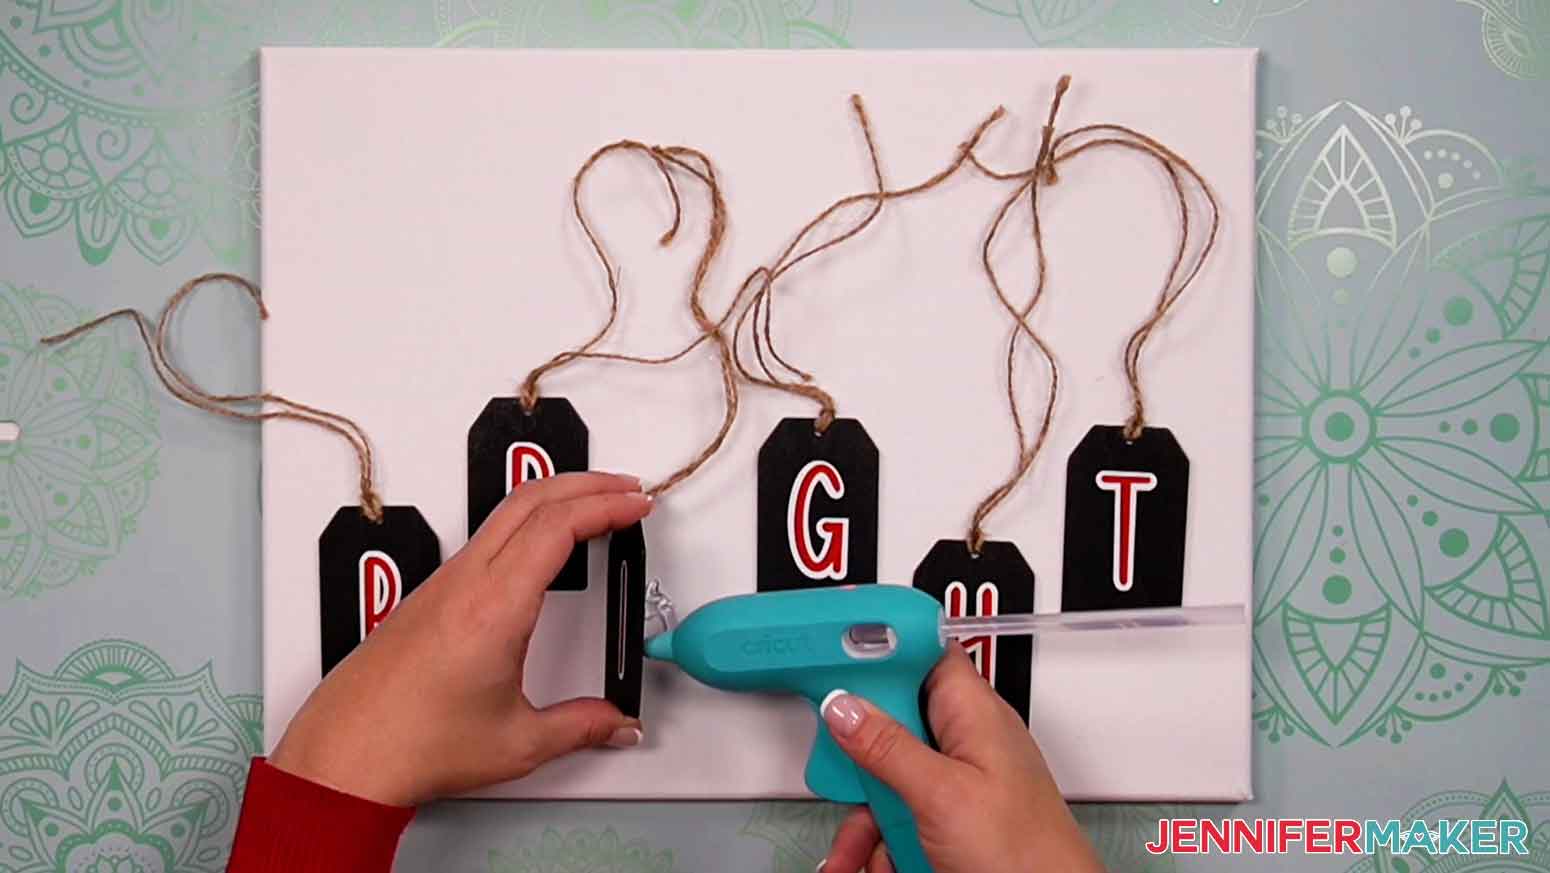 Use a hot glue gun to attach chalkboard tags to the canvas.